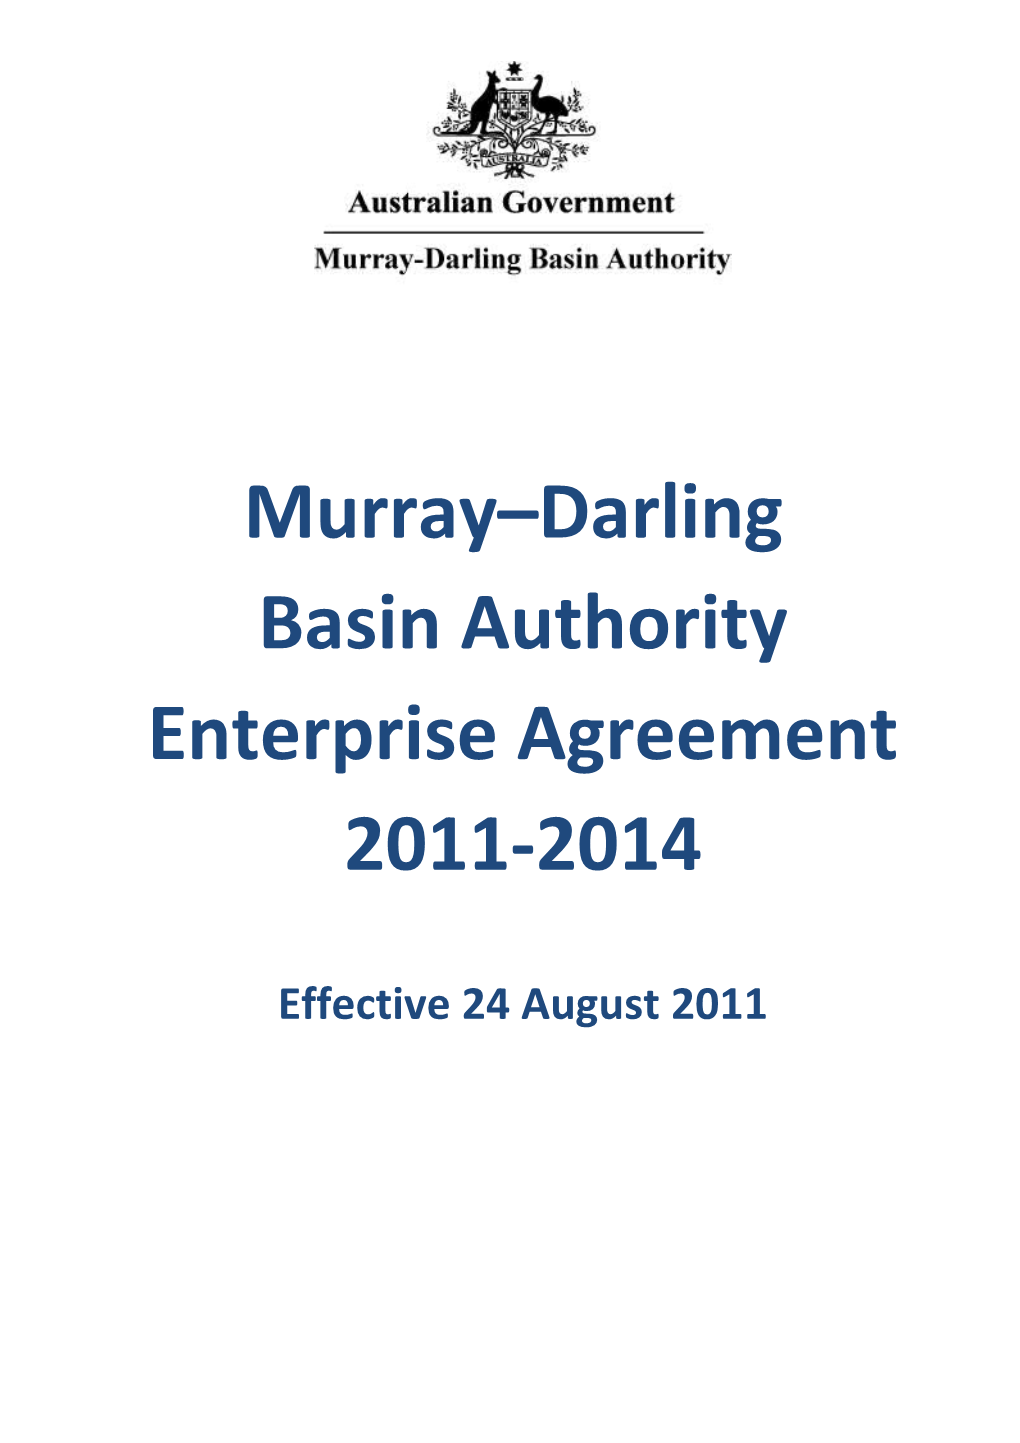 Murray Darling Basin Authority Enterprise Agreement 2011-2014 - Effective 24 August 2011